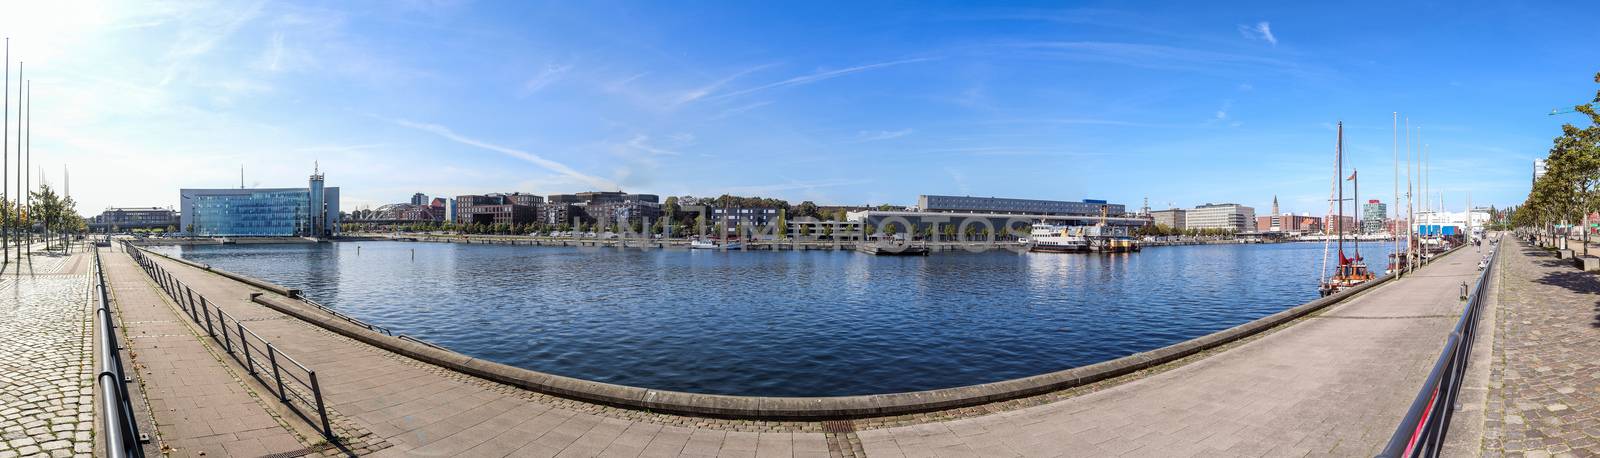 High resolution panorama of the port of Kiel on a sunny day by MP_foto71